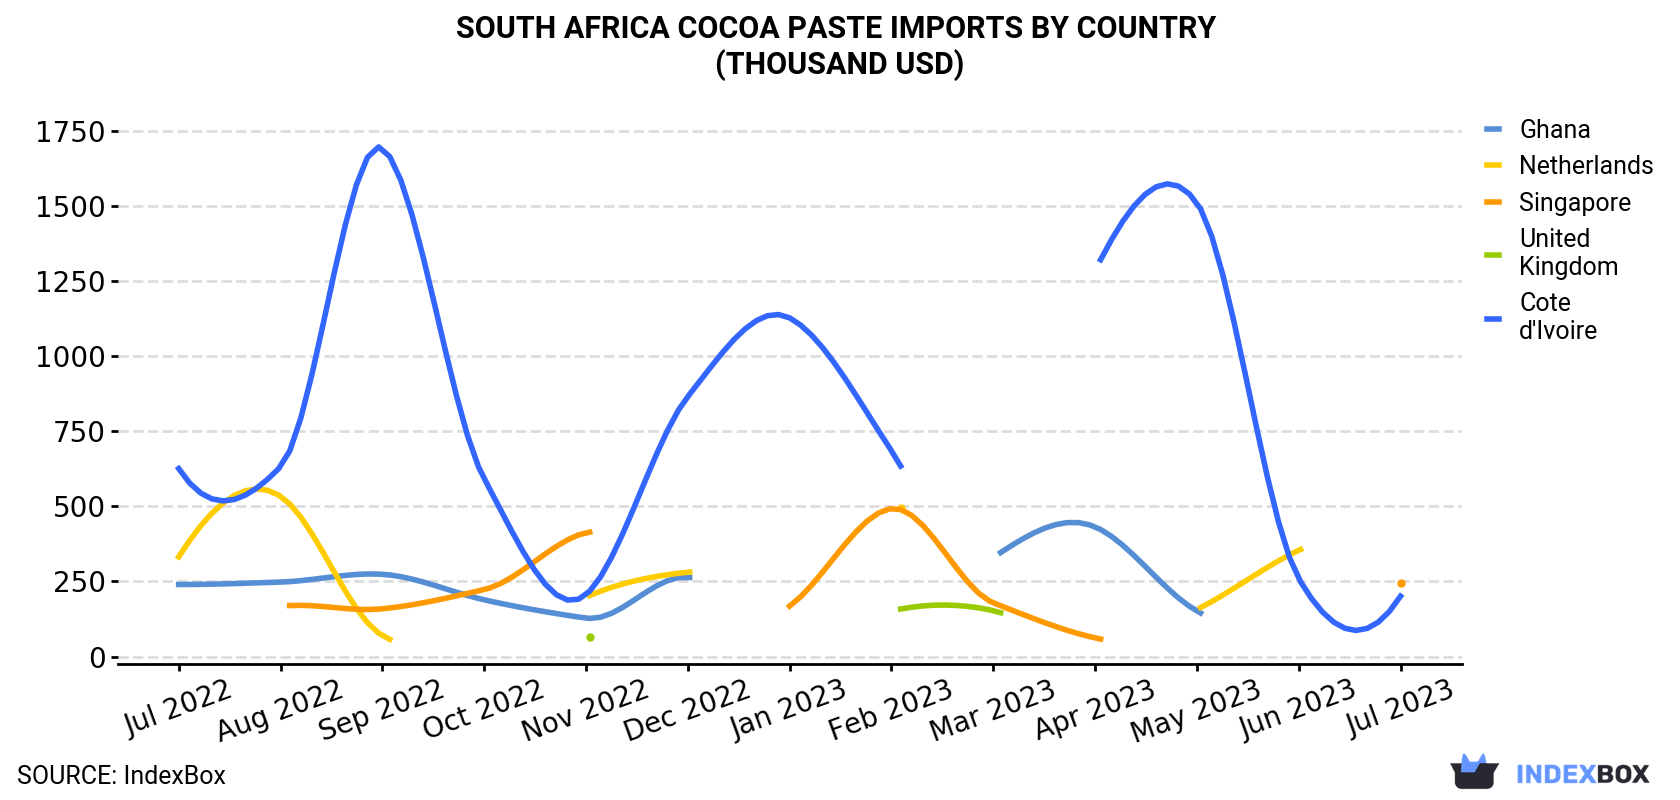 South Africa Cocoa Paste Imports By Country (Thousand USD)